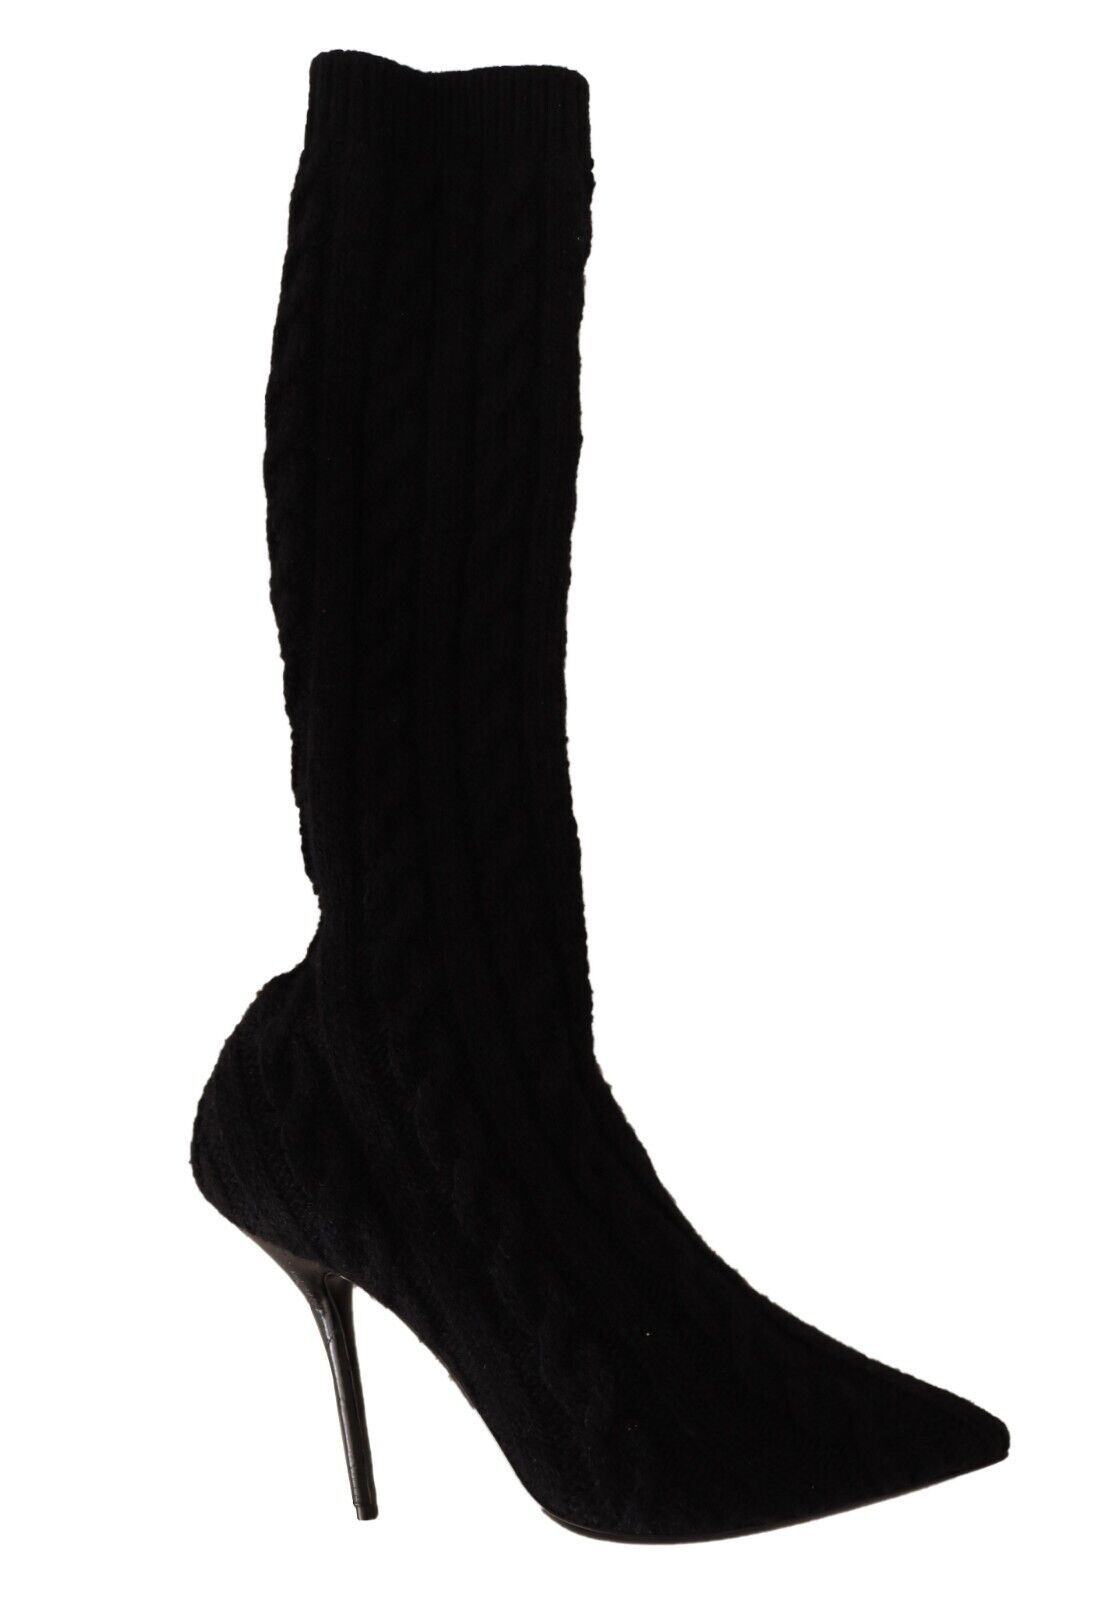 a pair of black high heeled boots